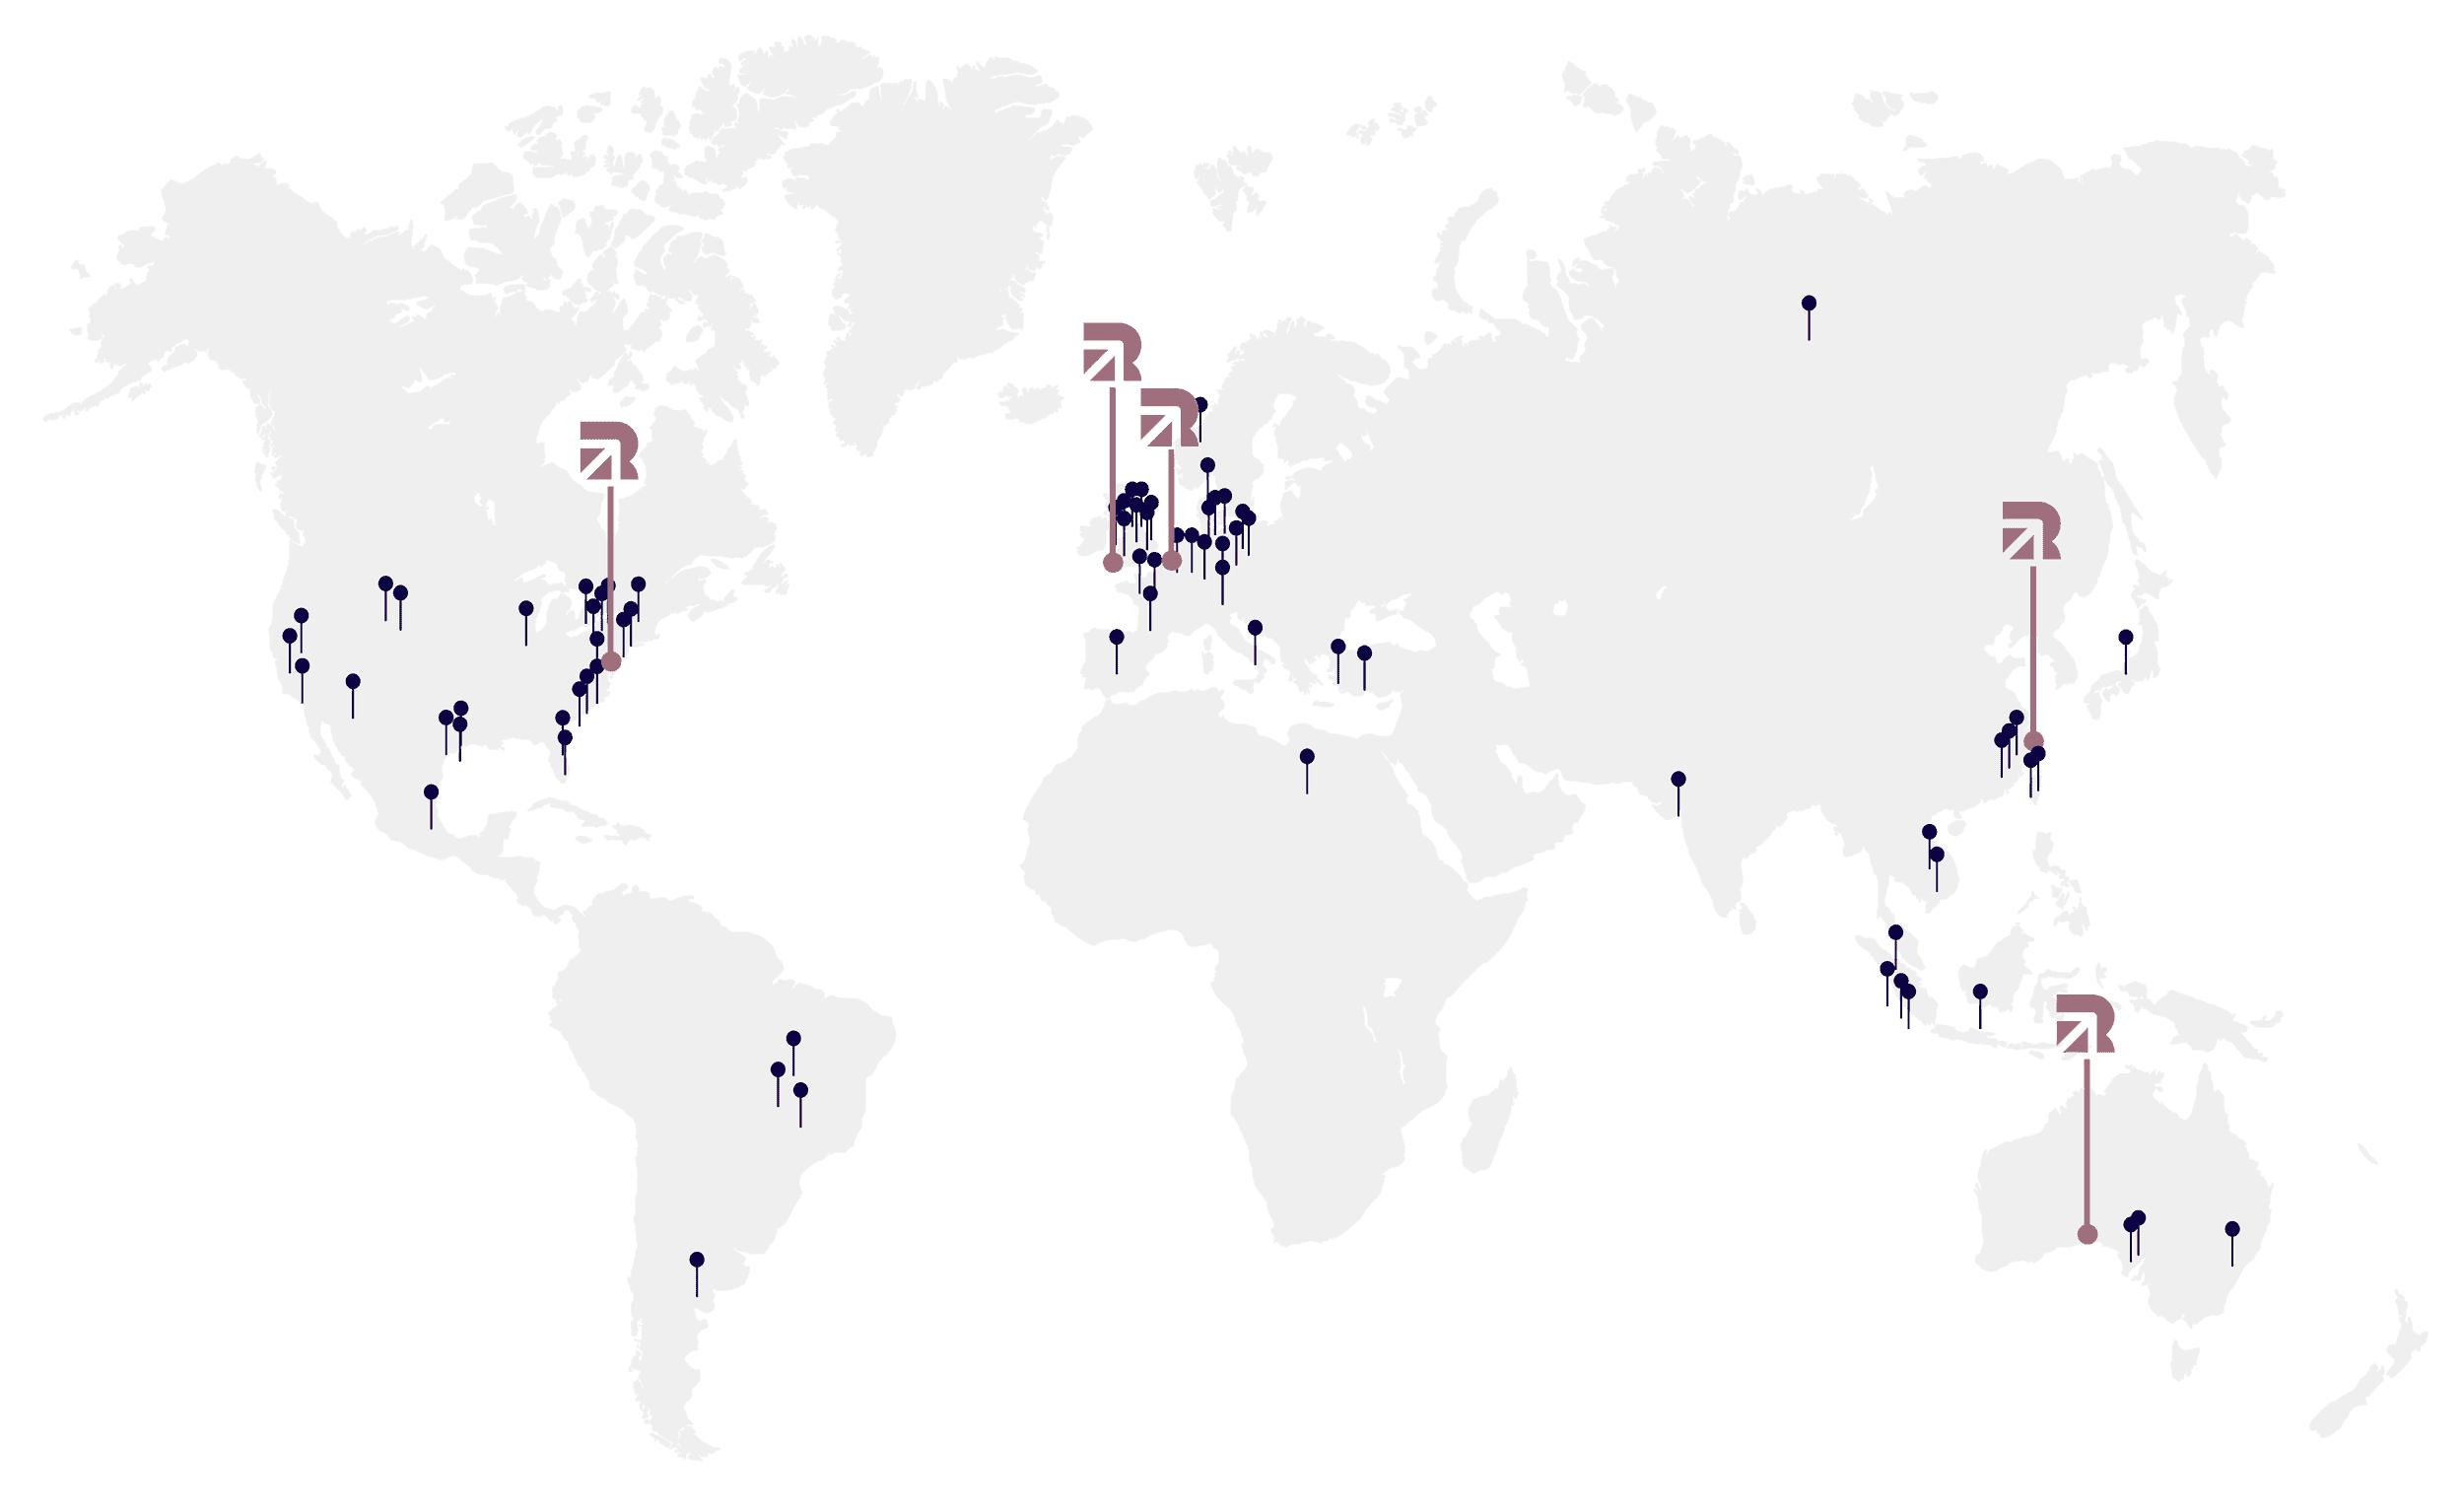 richardson-sales-performance-global-locations.png